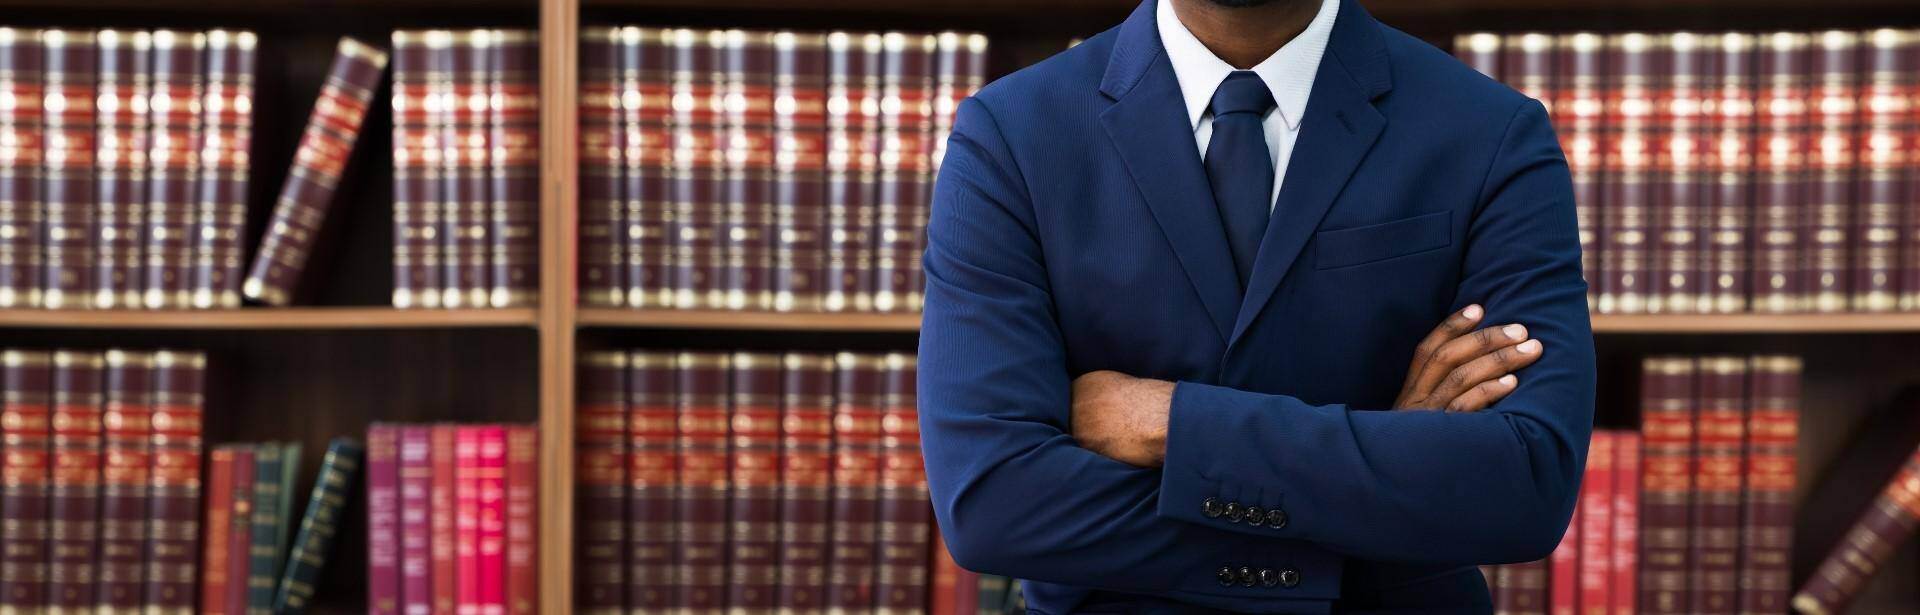 A black lawyer standing in front of a bookshelf of law book in Redan, Georgia